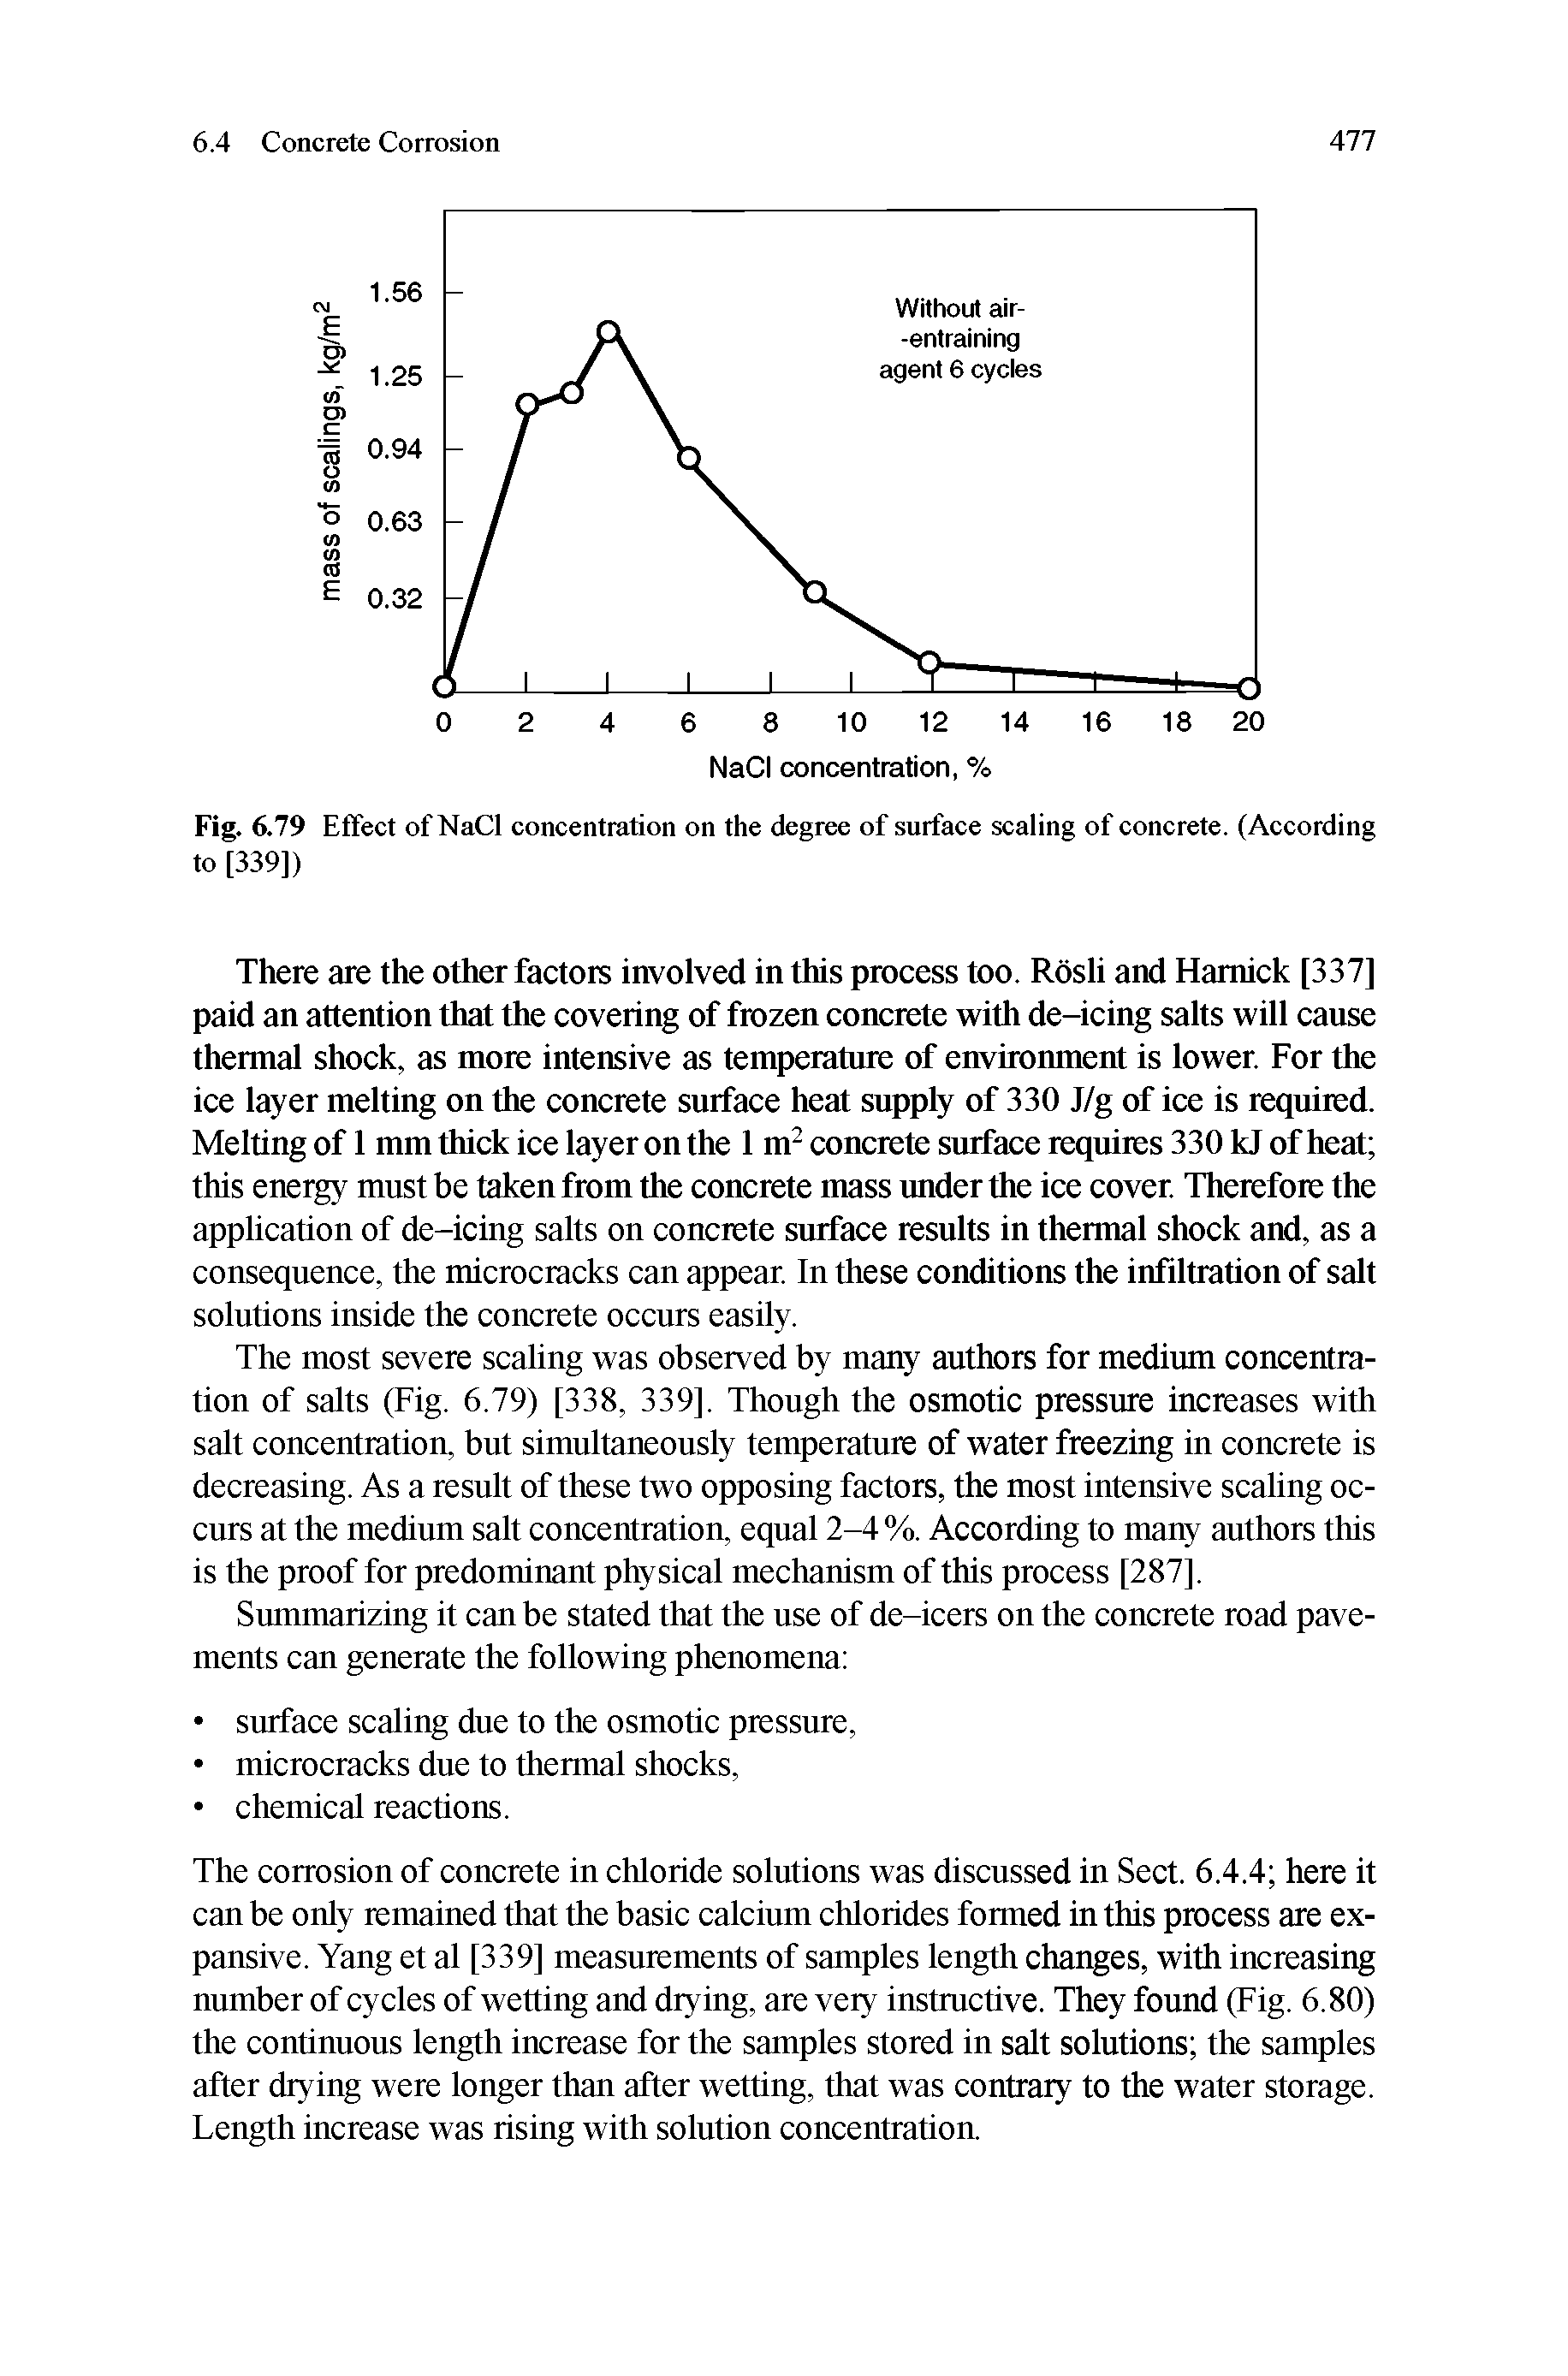 Fig. 6.79 Effect of NaCl concentration on the degree of surface scaling of concrete. (According to [339])...